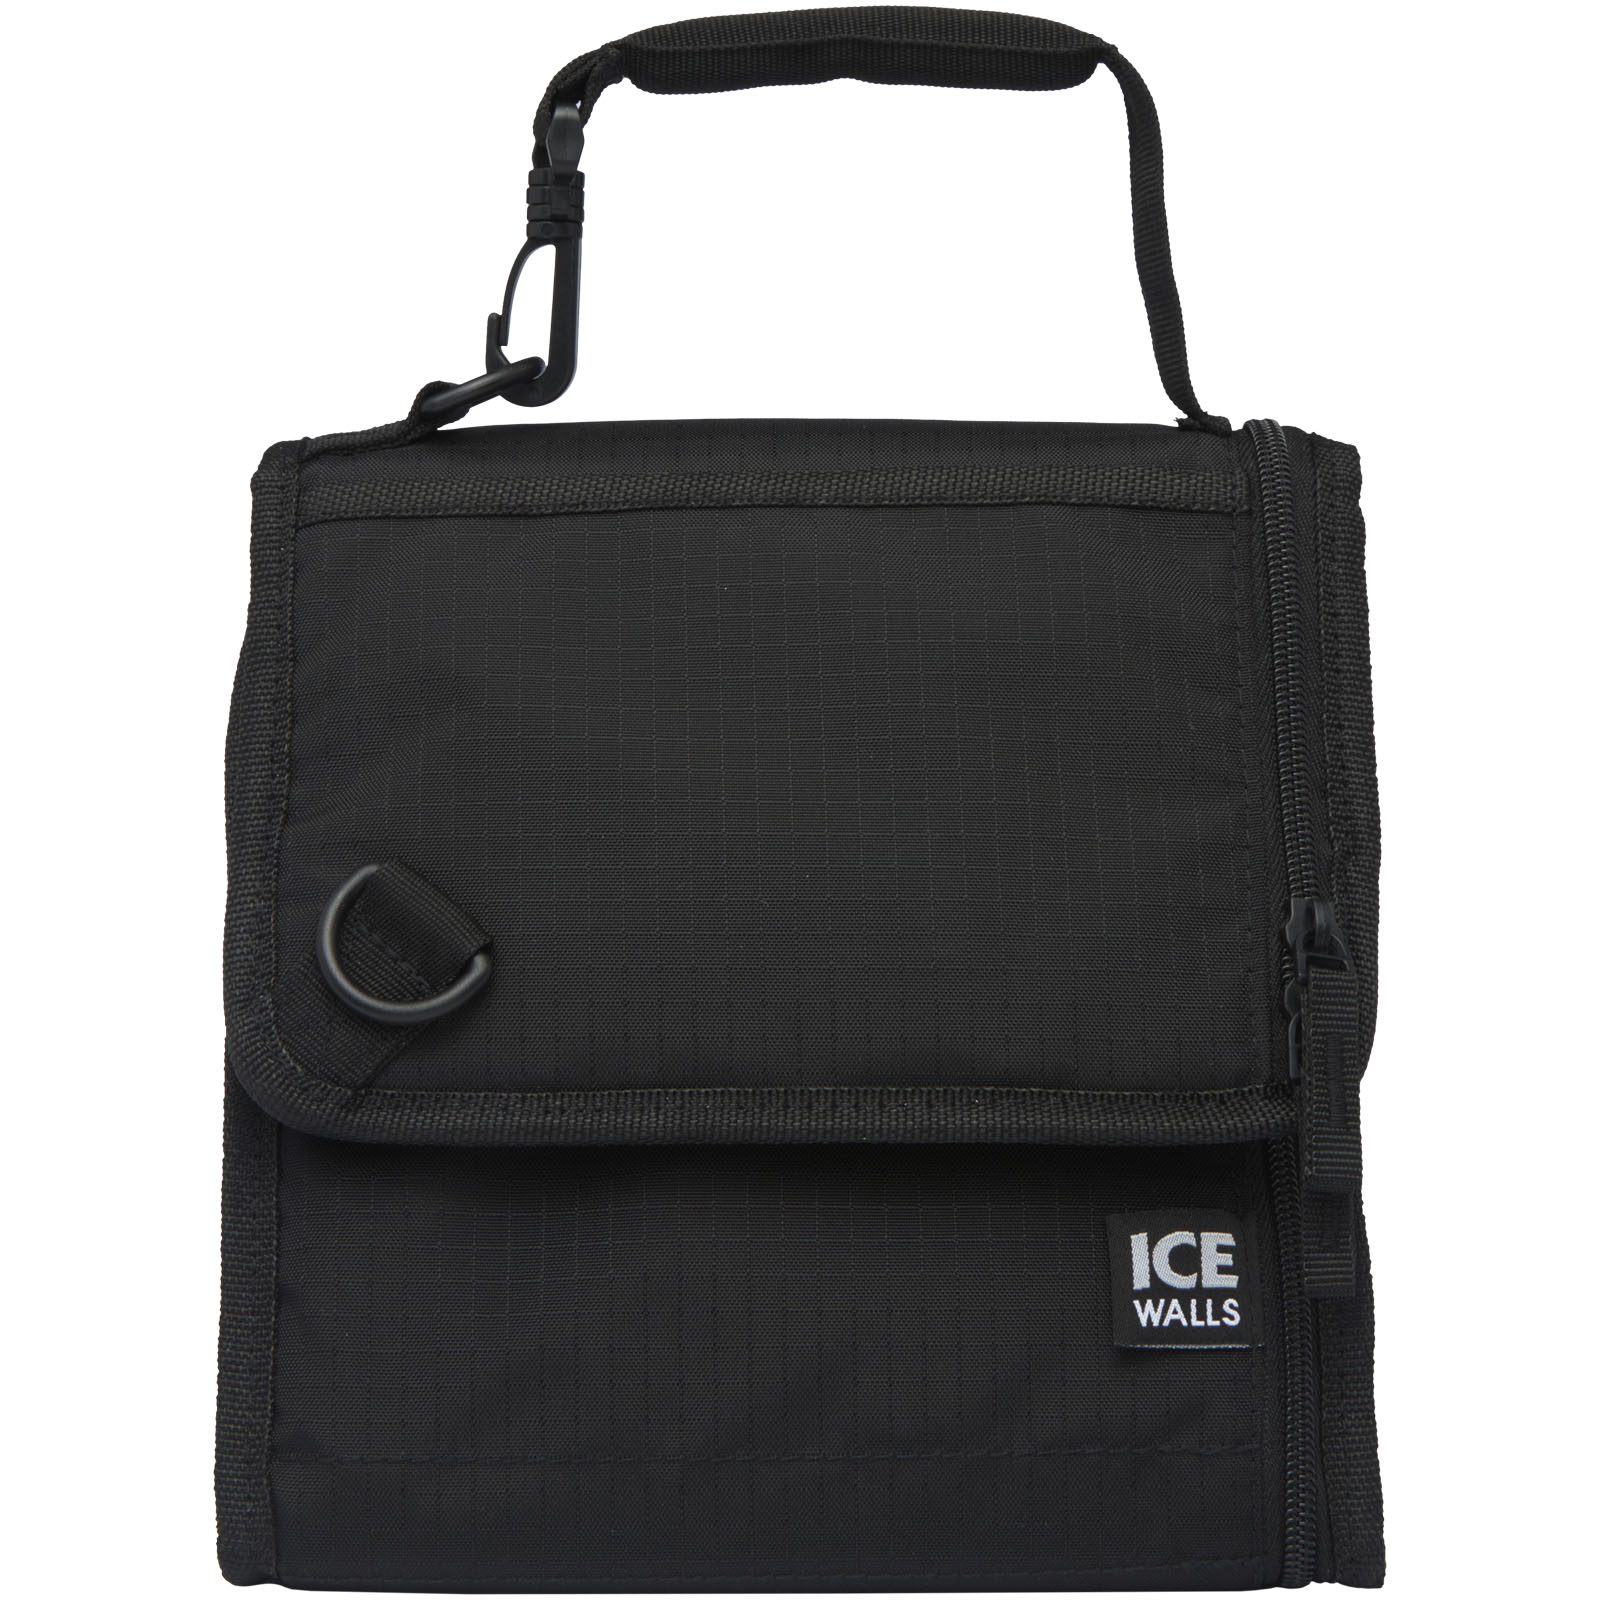 Advertising Cooler bags - Arctic Zone® Ice-wall lunch cooler bag 7L - 1